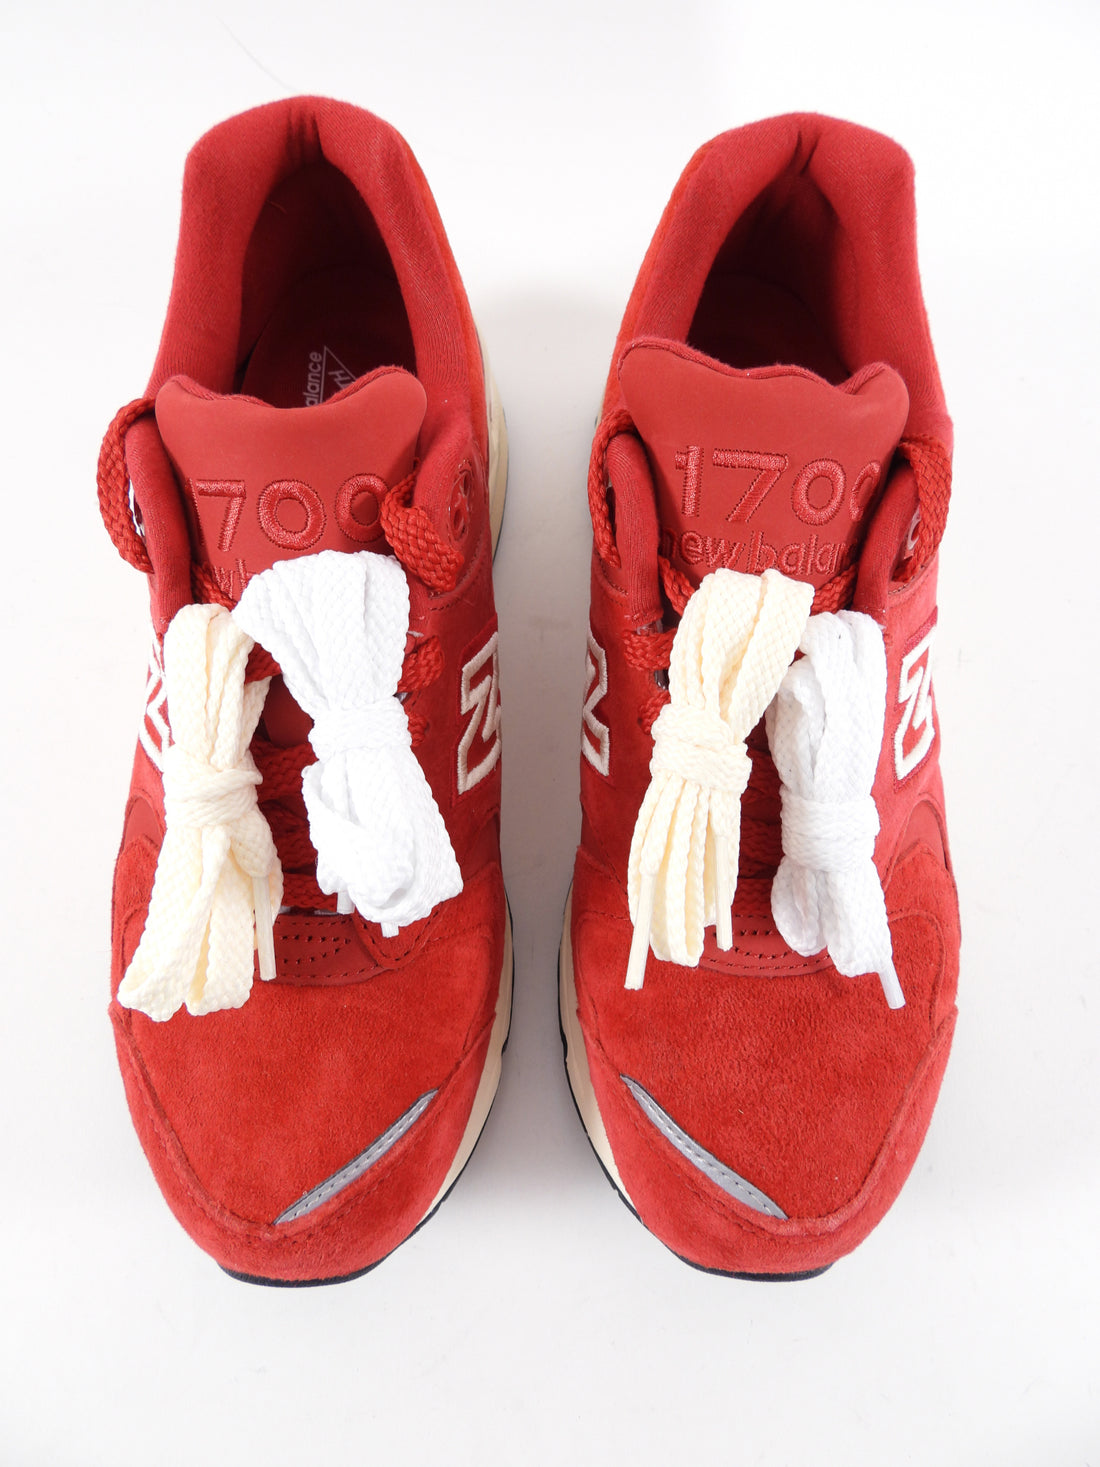 New Balance x Kith Red Sneakers CM 1700 - 7.5